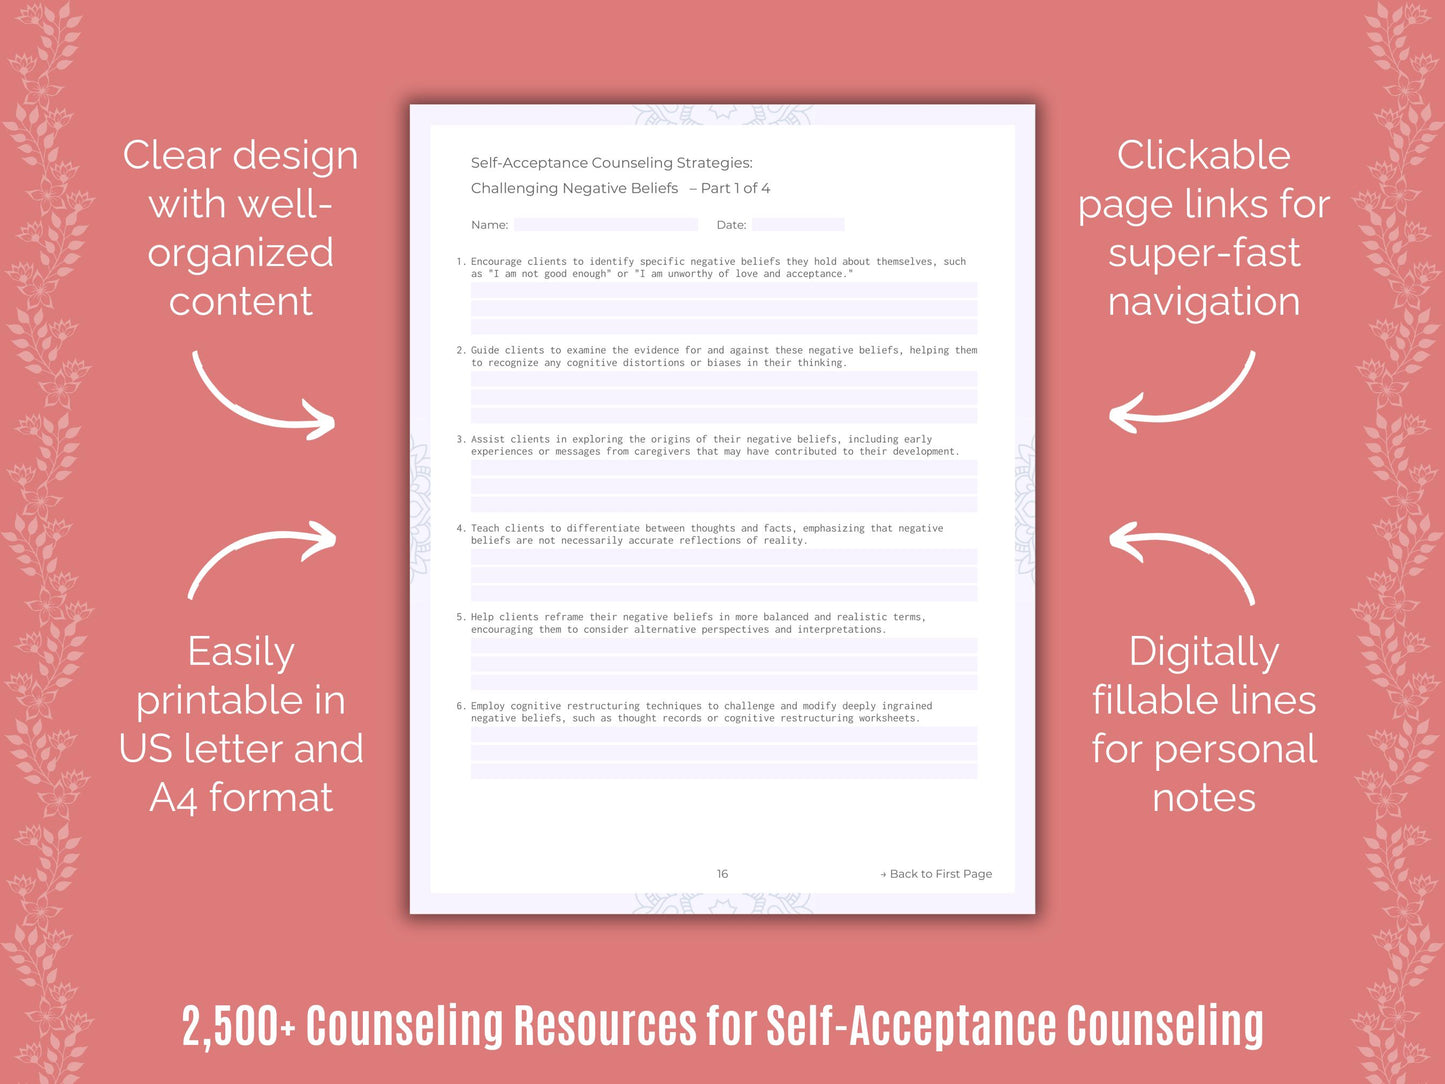 Counselor, Self-Acceptance Idea, Workbook, Template, Therapy, Mental Health, Counseling, Therapist, Self-Acceptance, Content, Self-Acceptance Tool, Resource, Worksheet